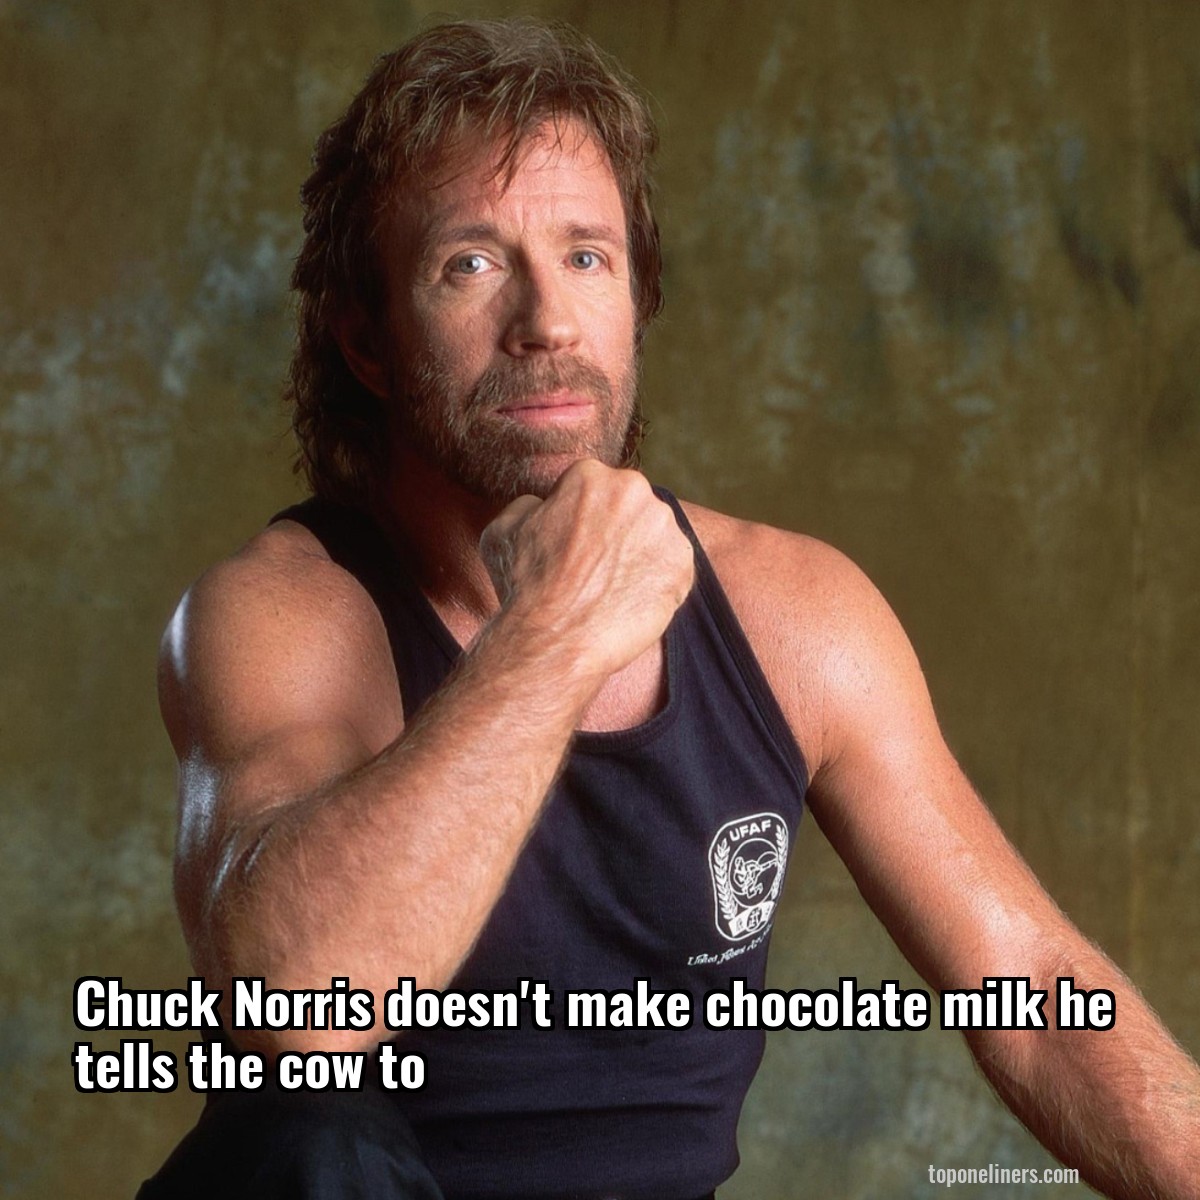 Chuck Norris doesn't make chocolate milk he tells the cow to